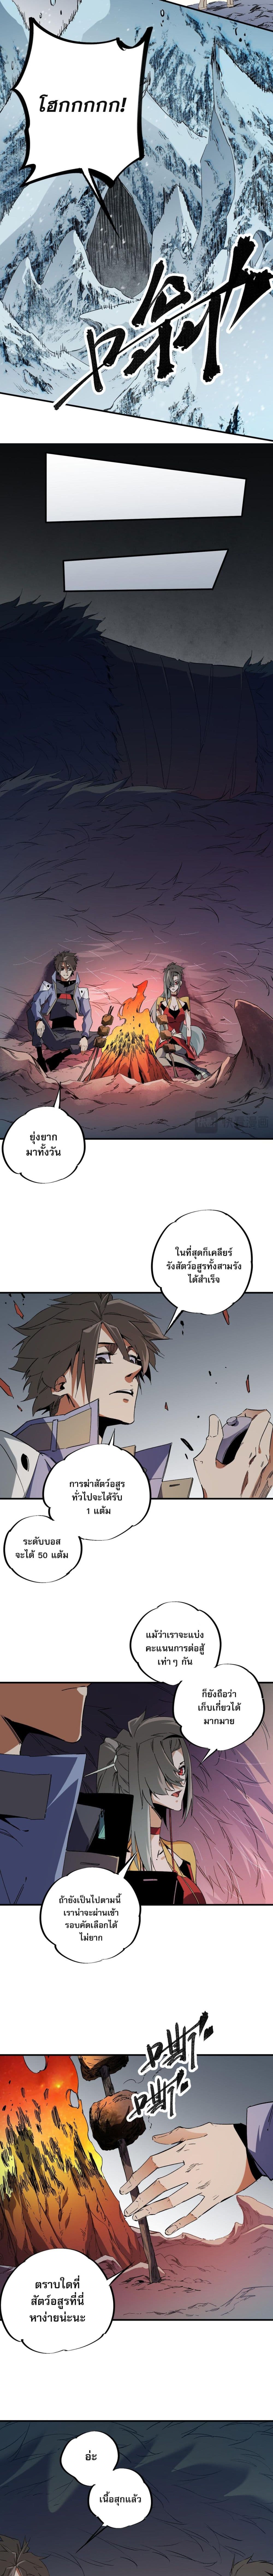 Job Changing for the Entire Population: The Jobless Me Will Terminate the Gods ฉันคือผู้เล่นไร้อาชีพที่สังหารเหล่าเทพ 63-63